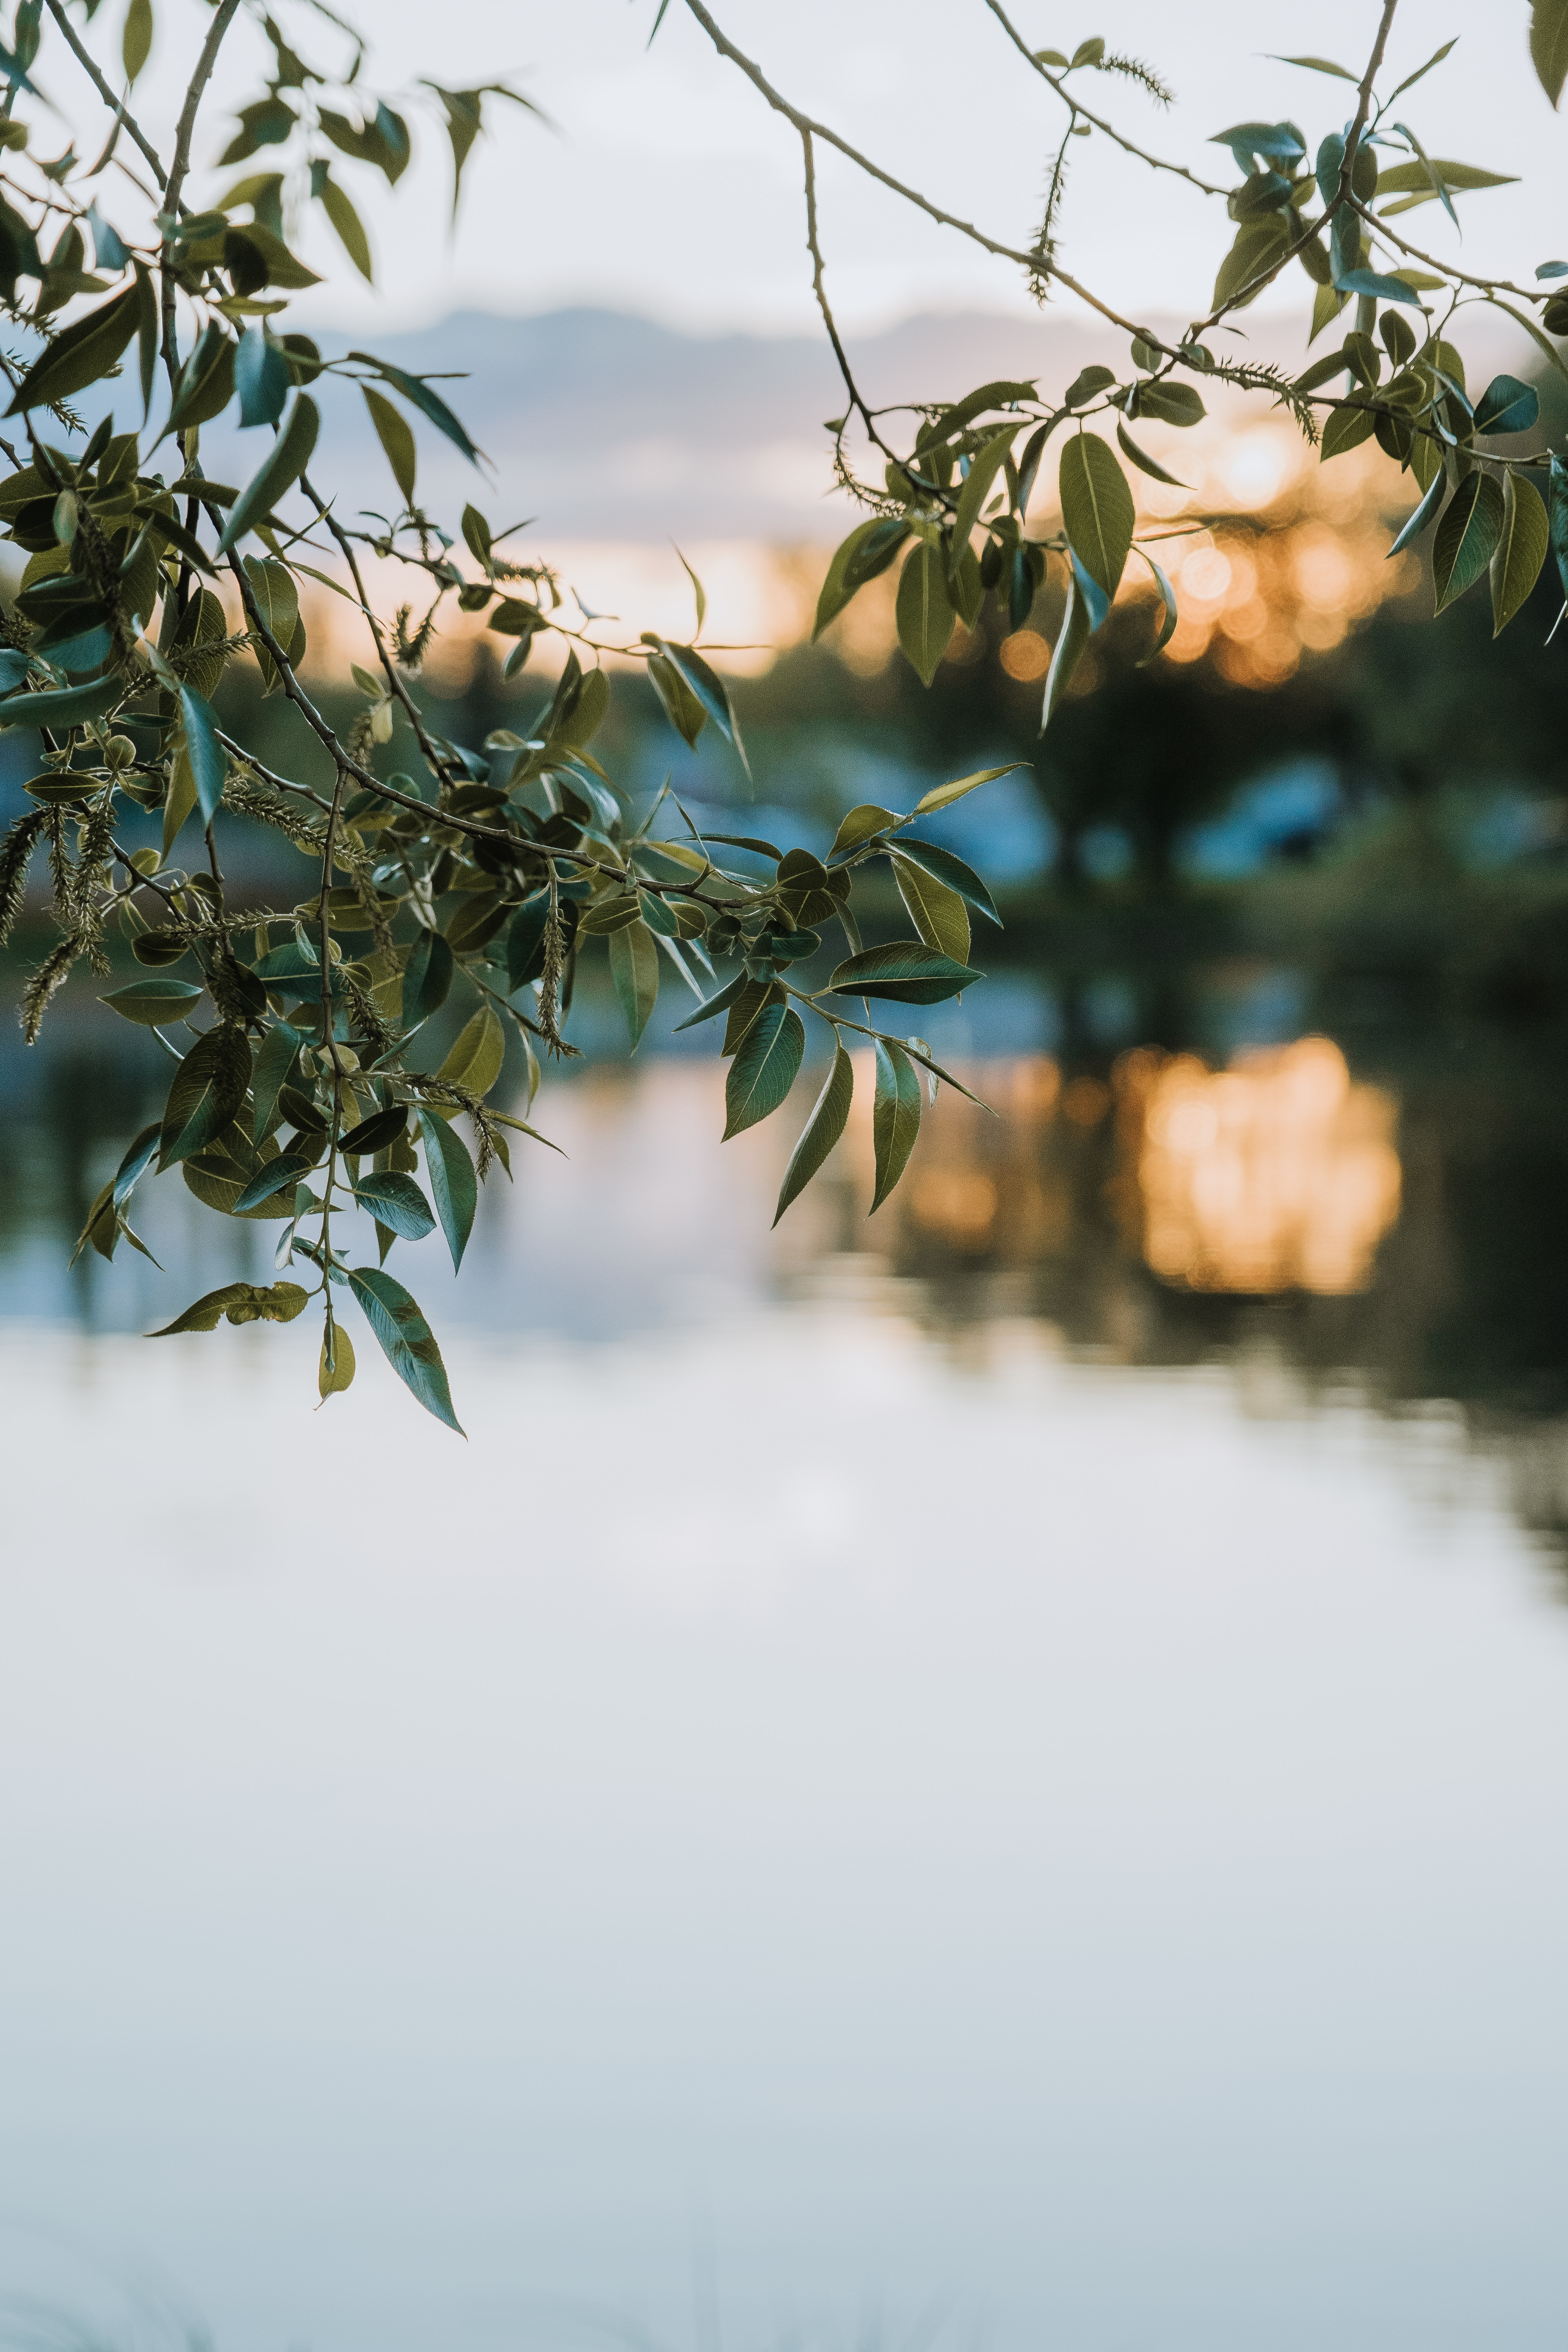 Download PC Wallpaper smooth, nature, leaves, lake, blur, branches